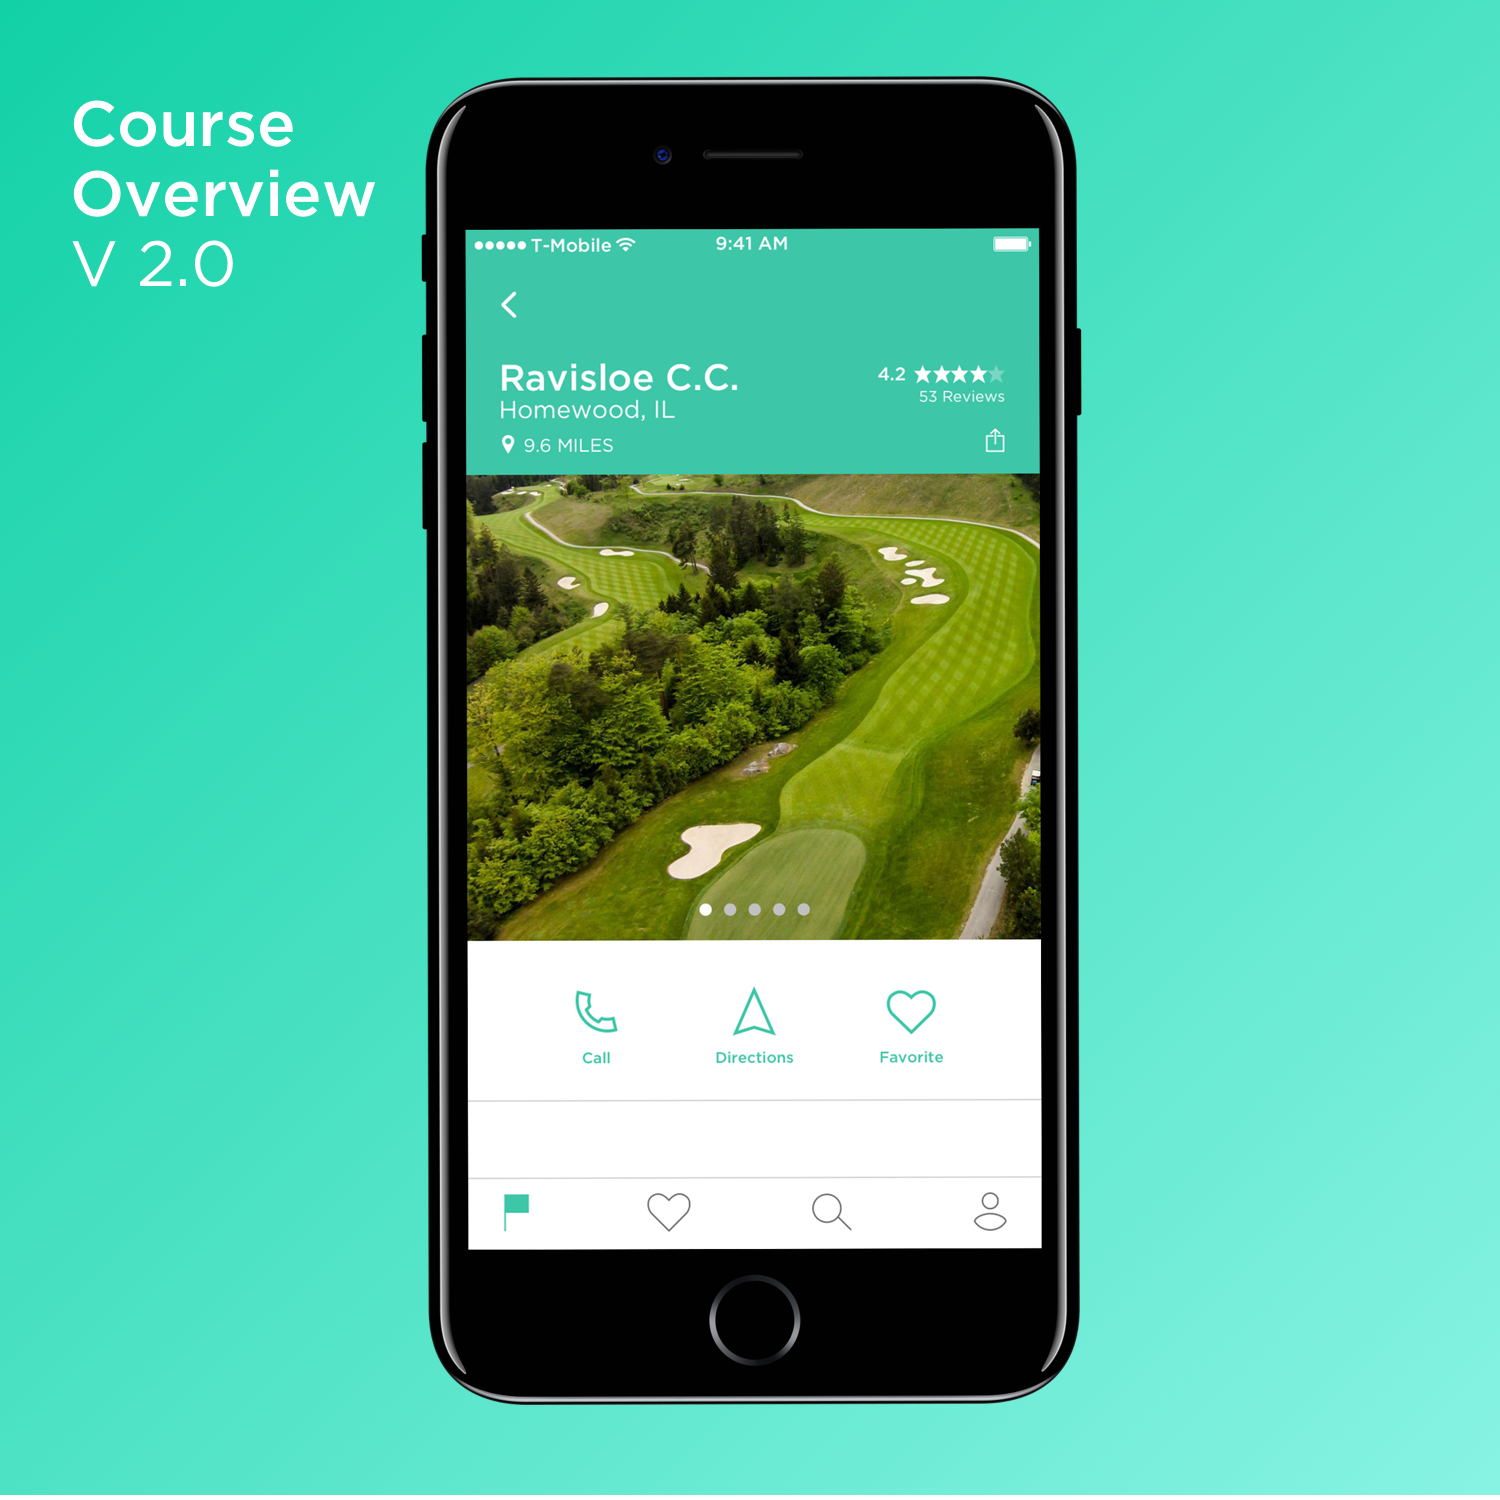  In testing, users wanted to be able to call or start navigation to a course right away, an action menu was added. 